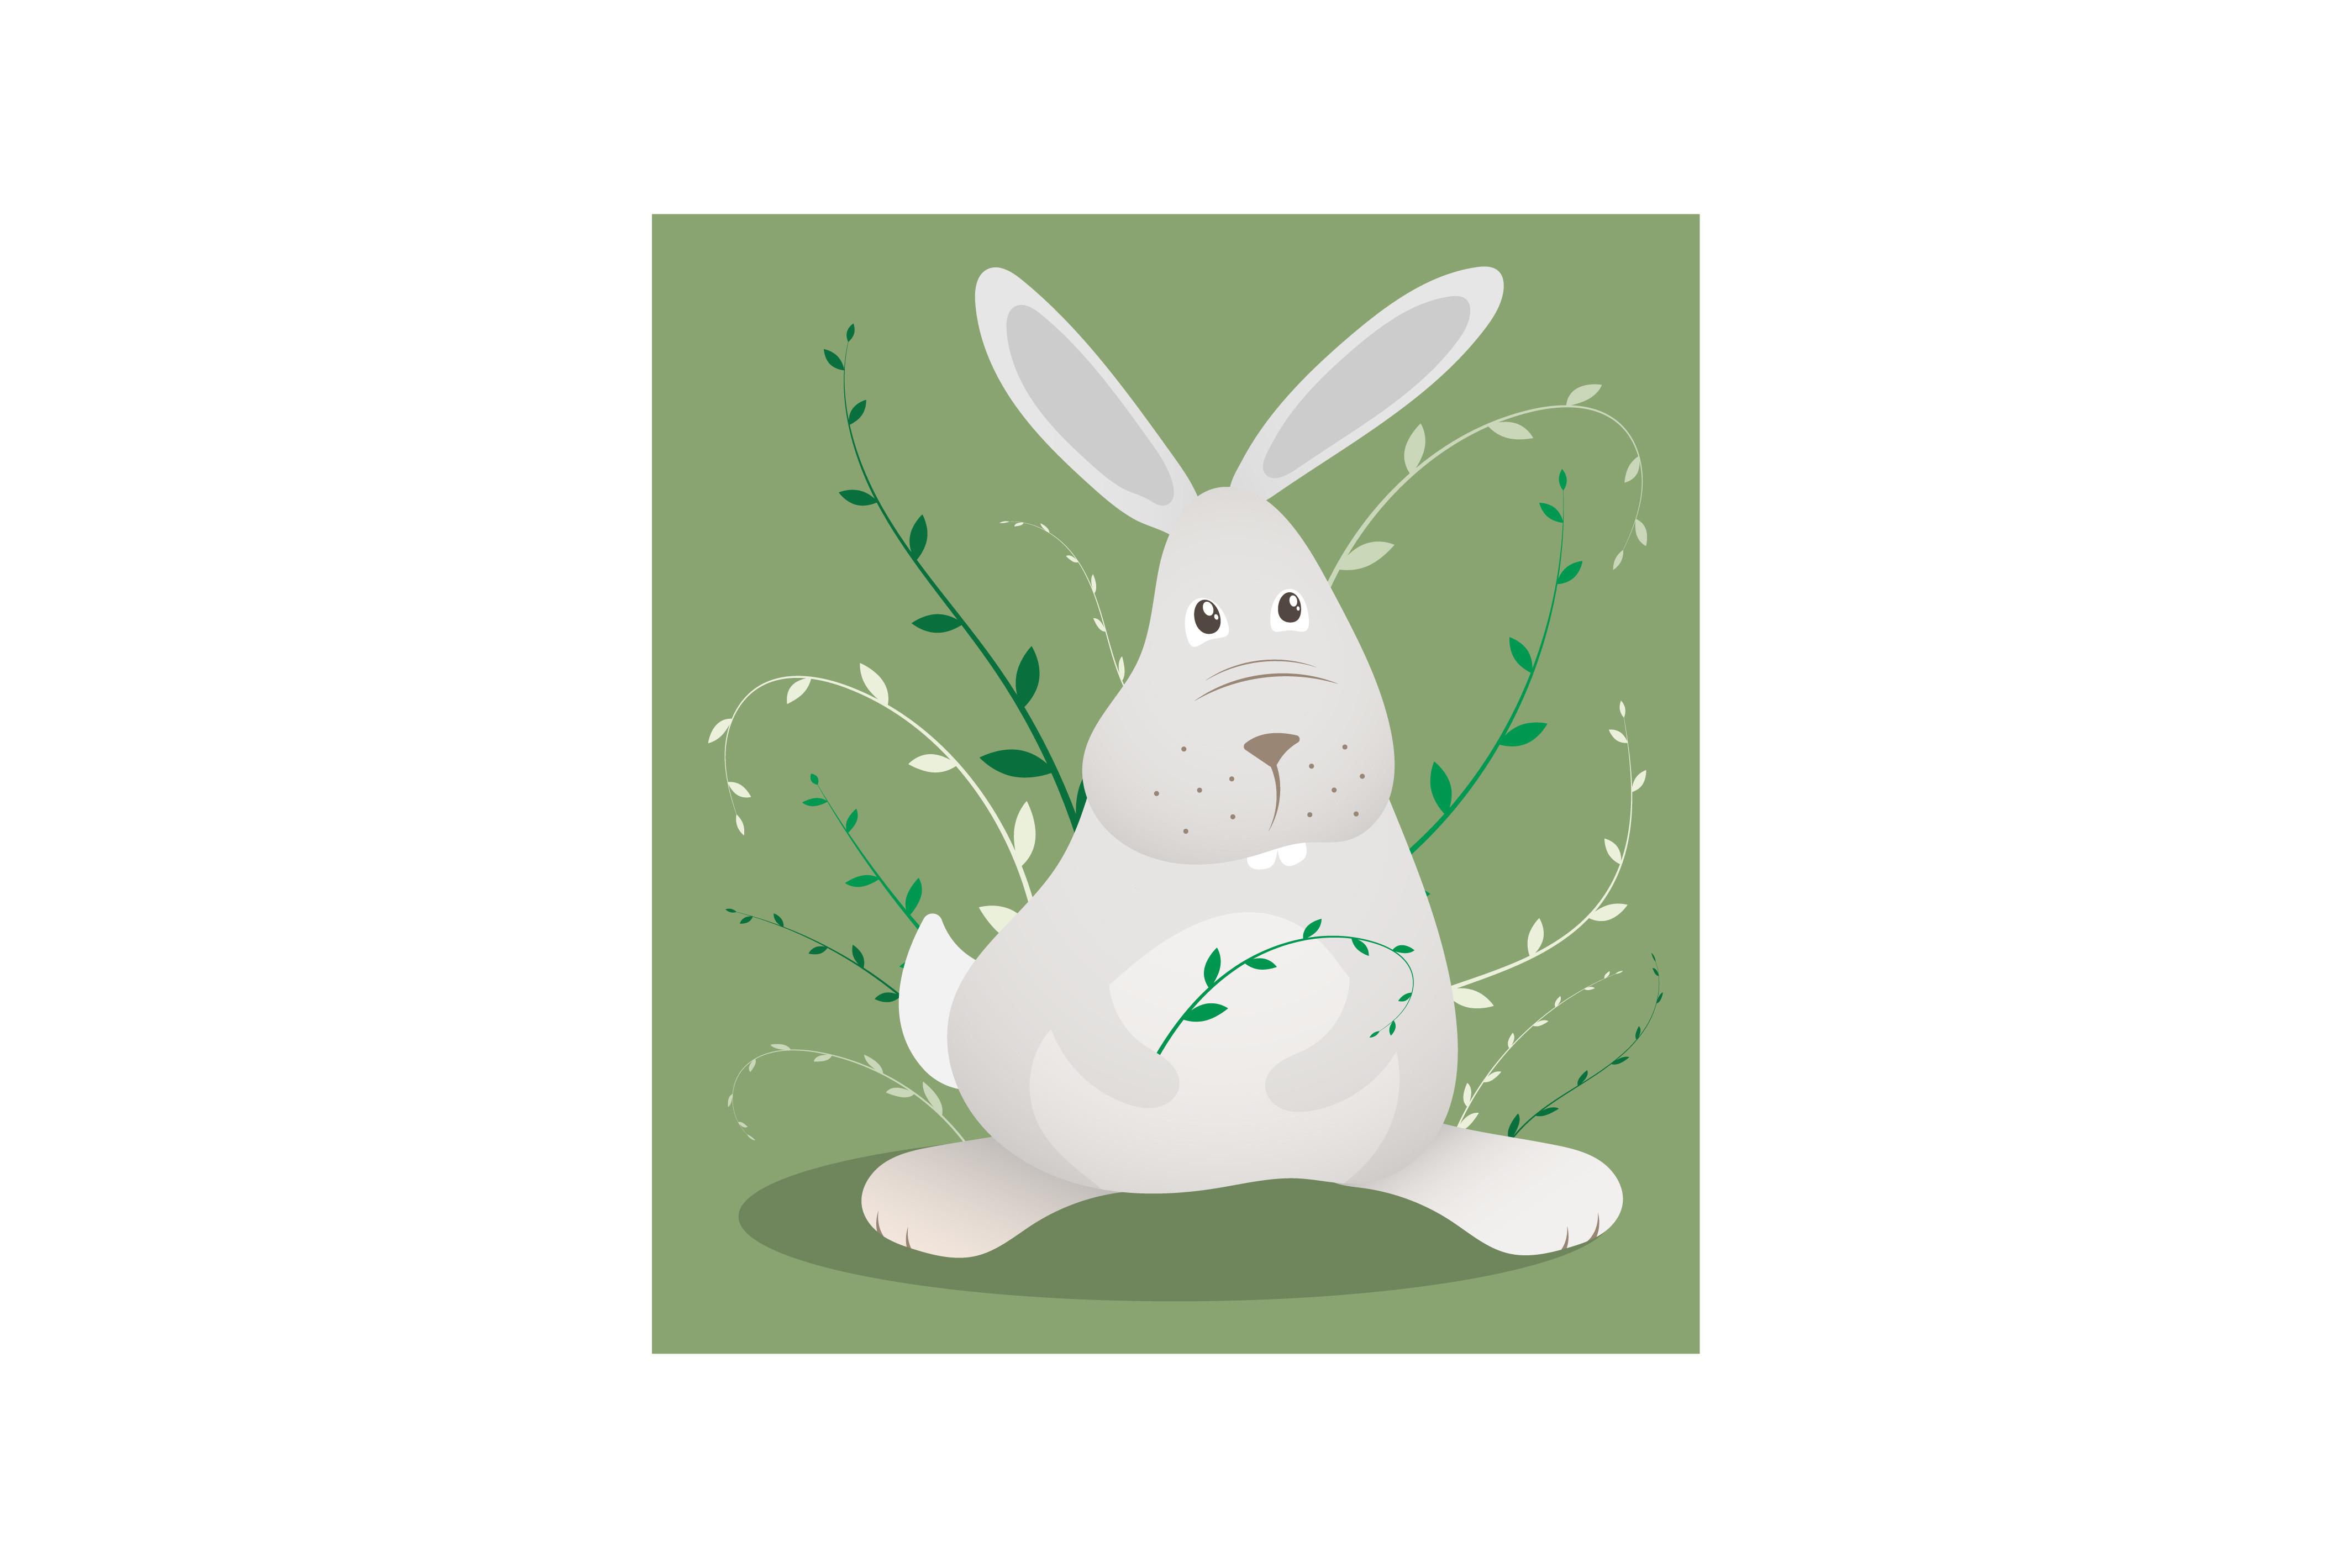 Little Funny Rabbit Sits on Green Meadow